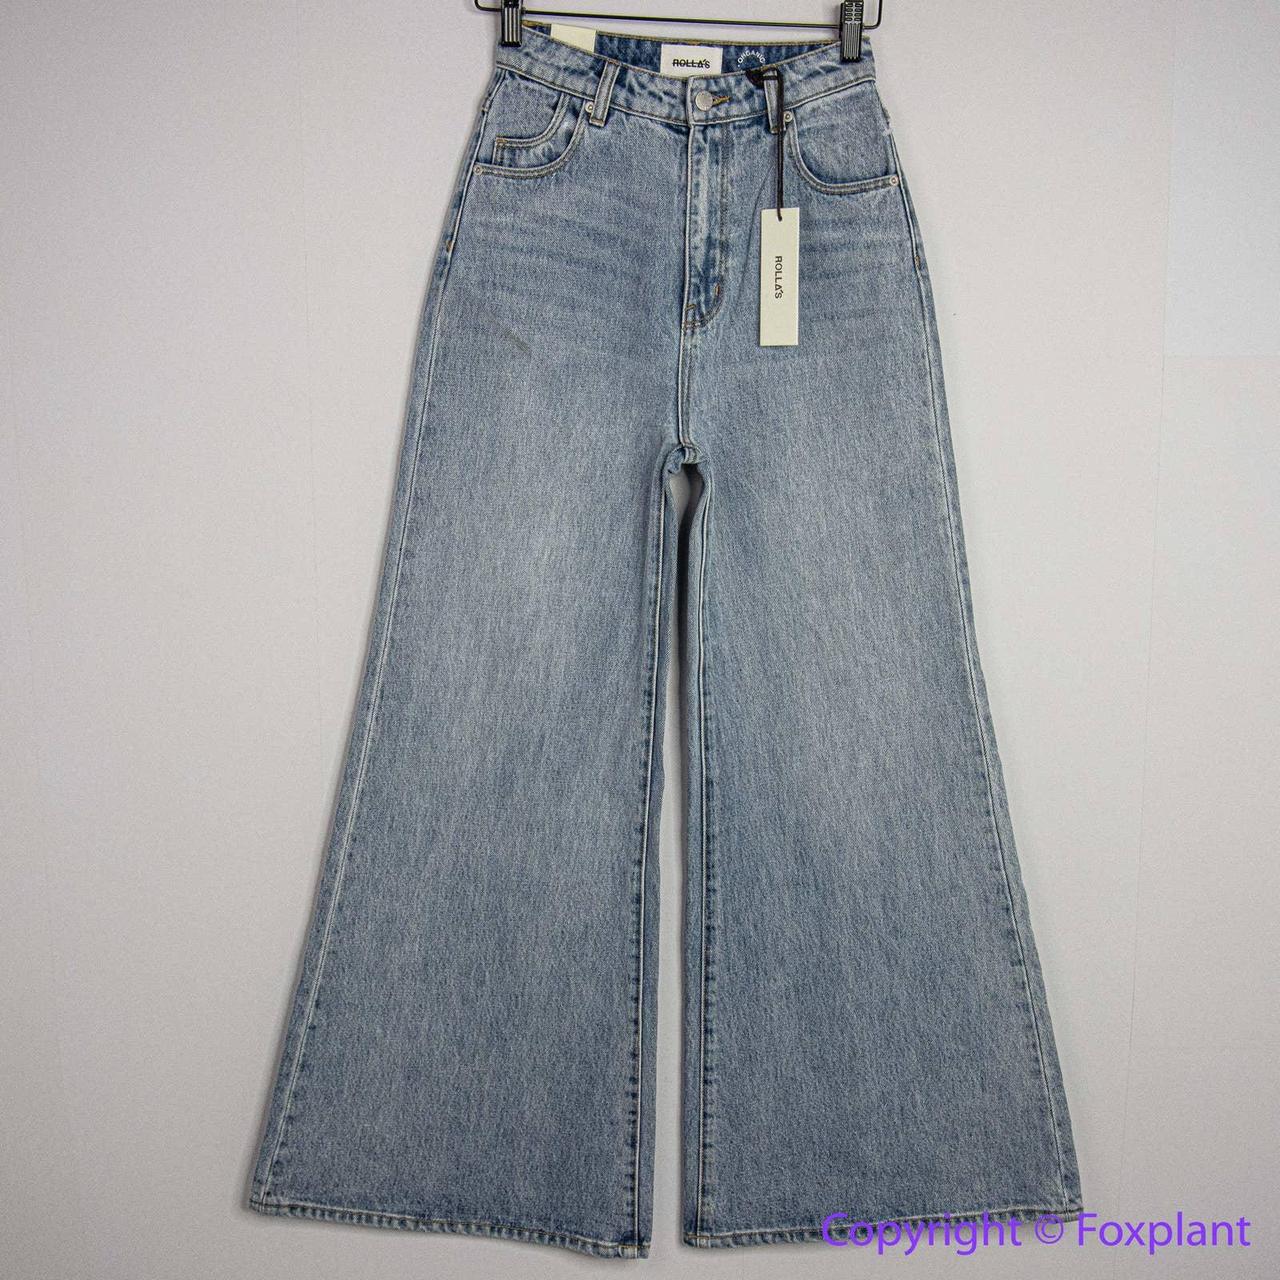 NEW ROLLA'S ELLE SUPER FLARE jeans IN AMY ORGANIC,... - Depop